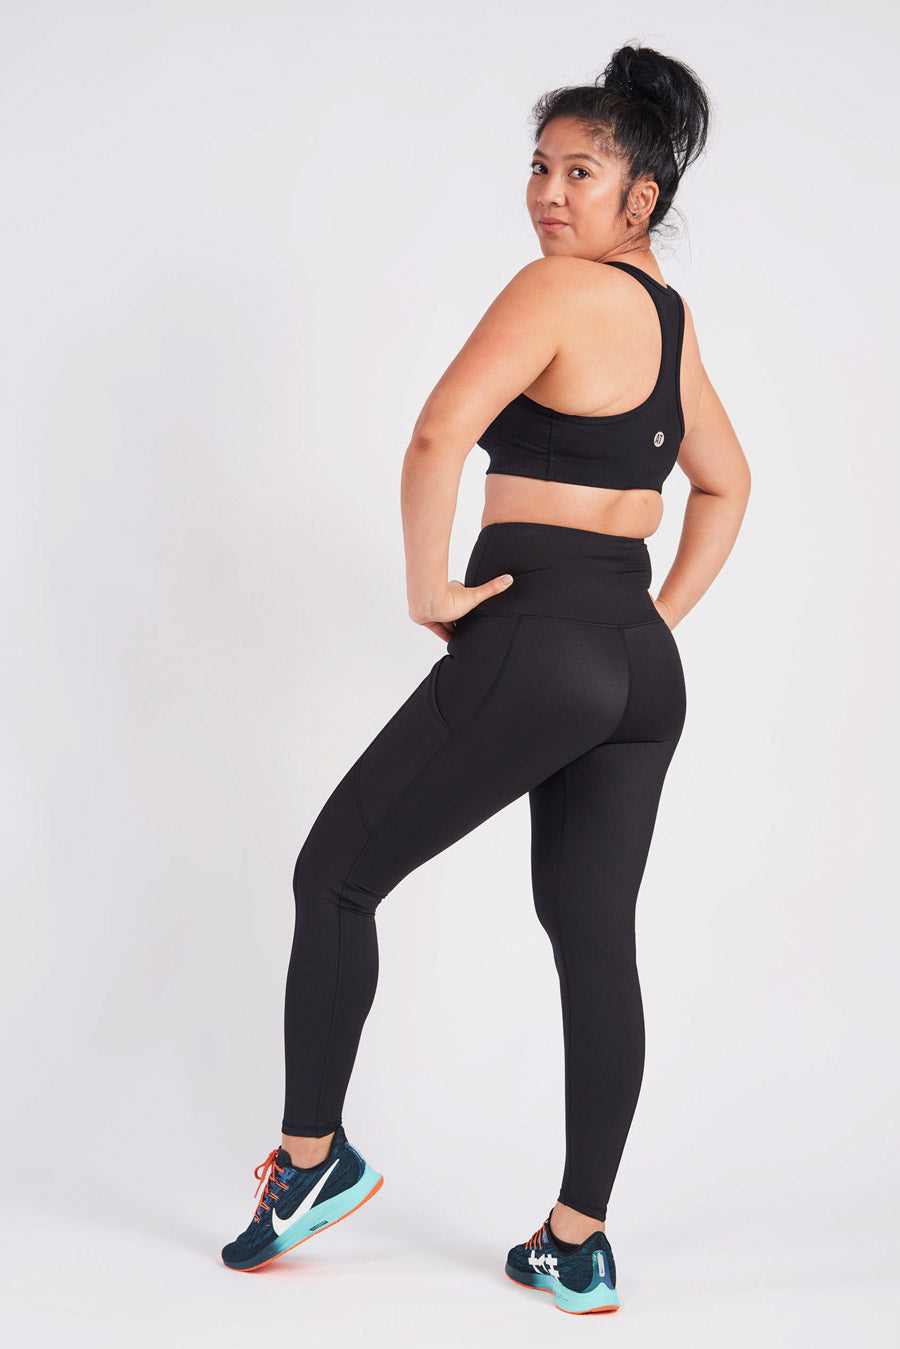 Petite Smart Pocket Full Length Tight - Black from Active Truth™
